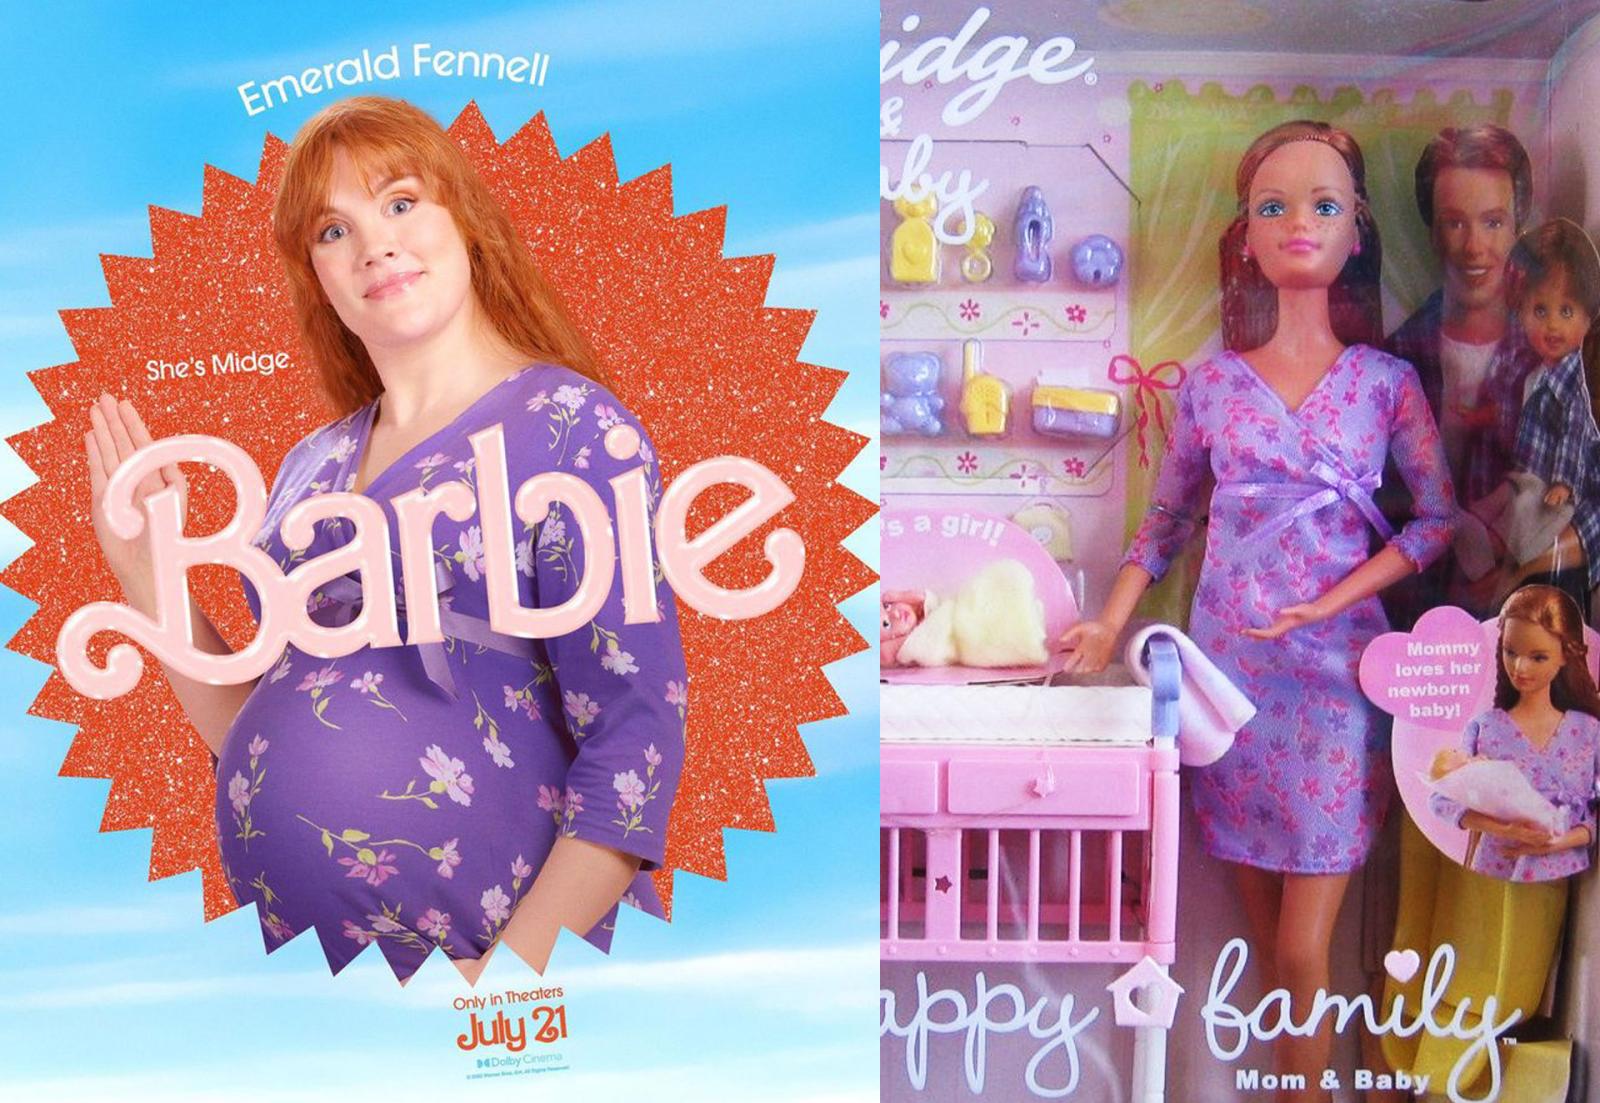 Cast of Barbie & Their Real-life Doll Counterparts: Resemblance is Uncanny - image 4